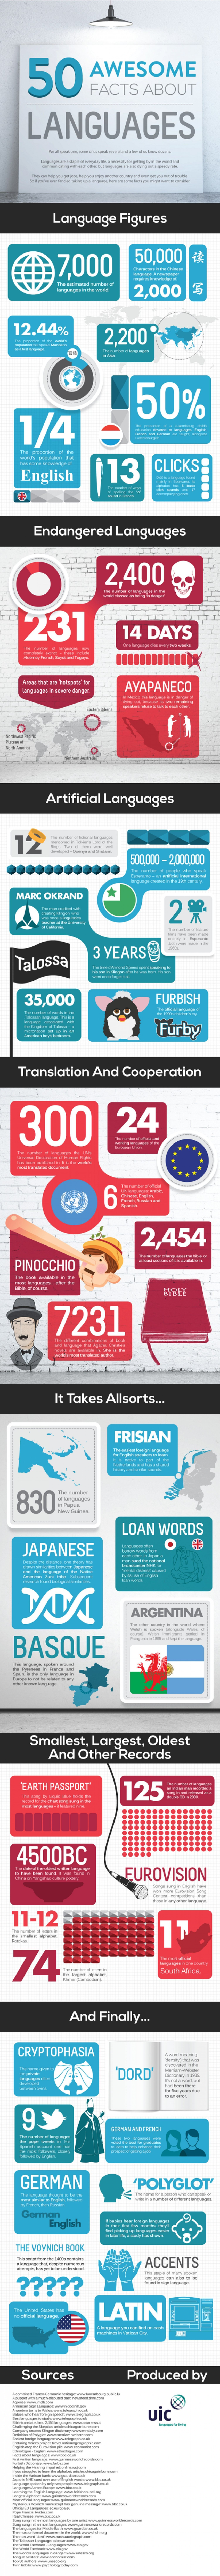 50 Awesome Facts About Languages Infographic